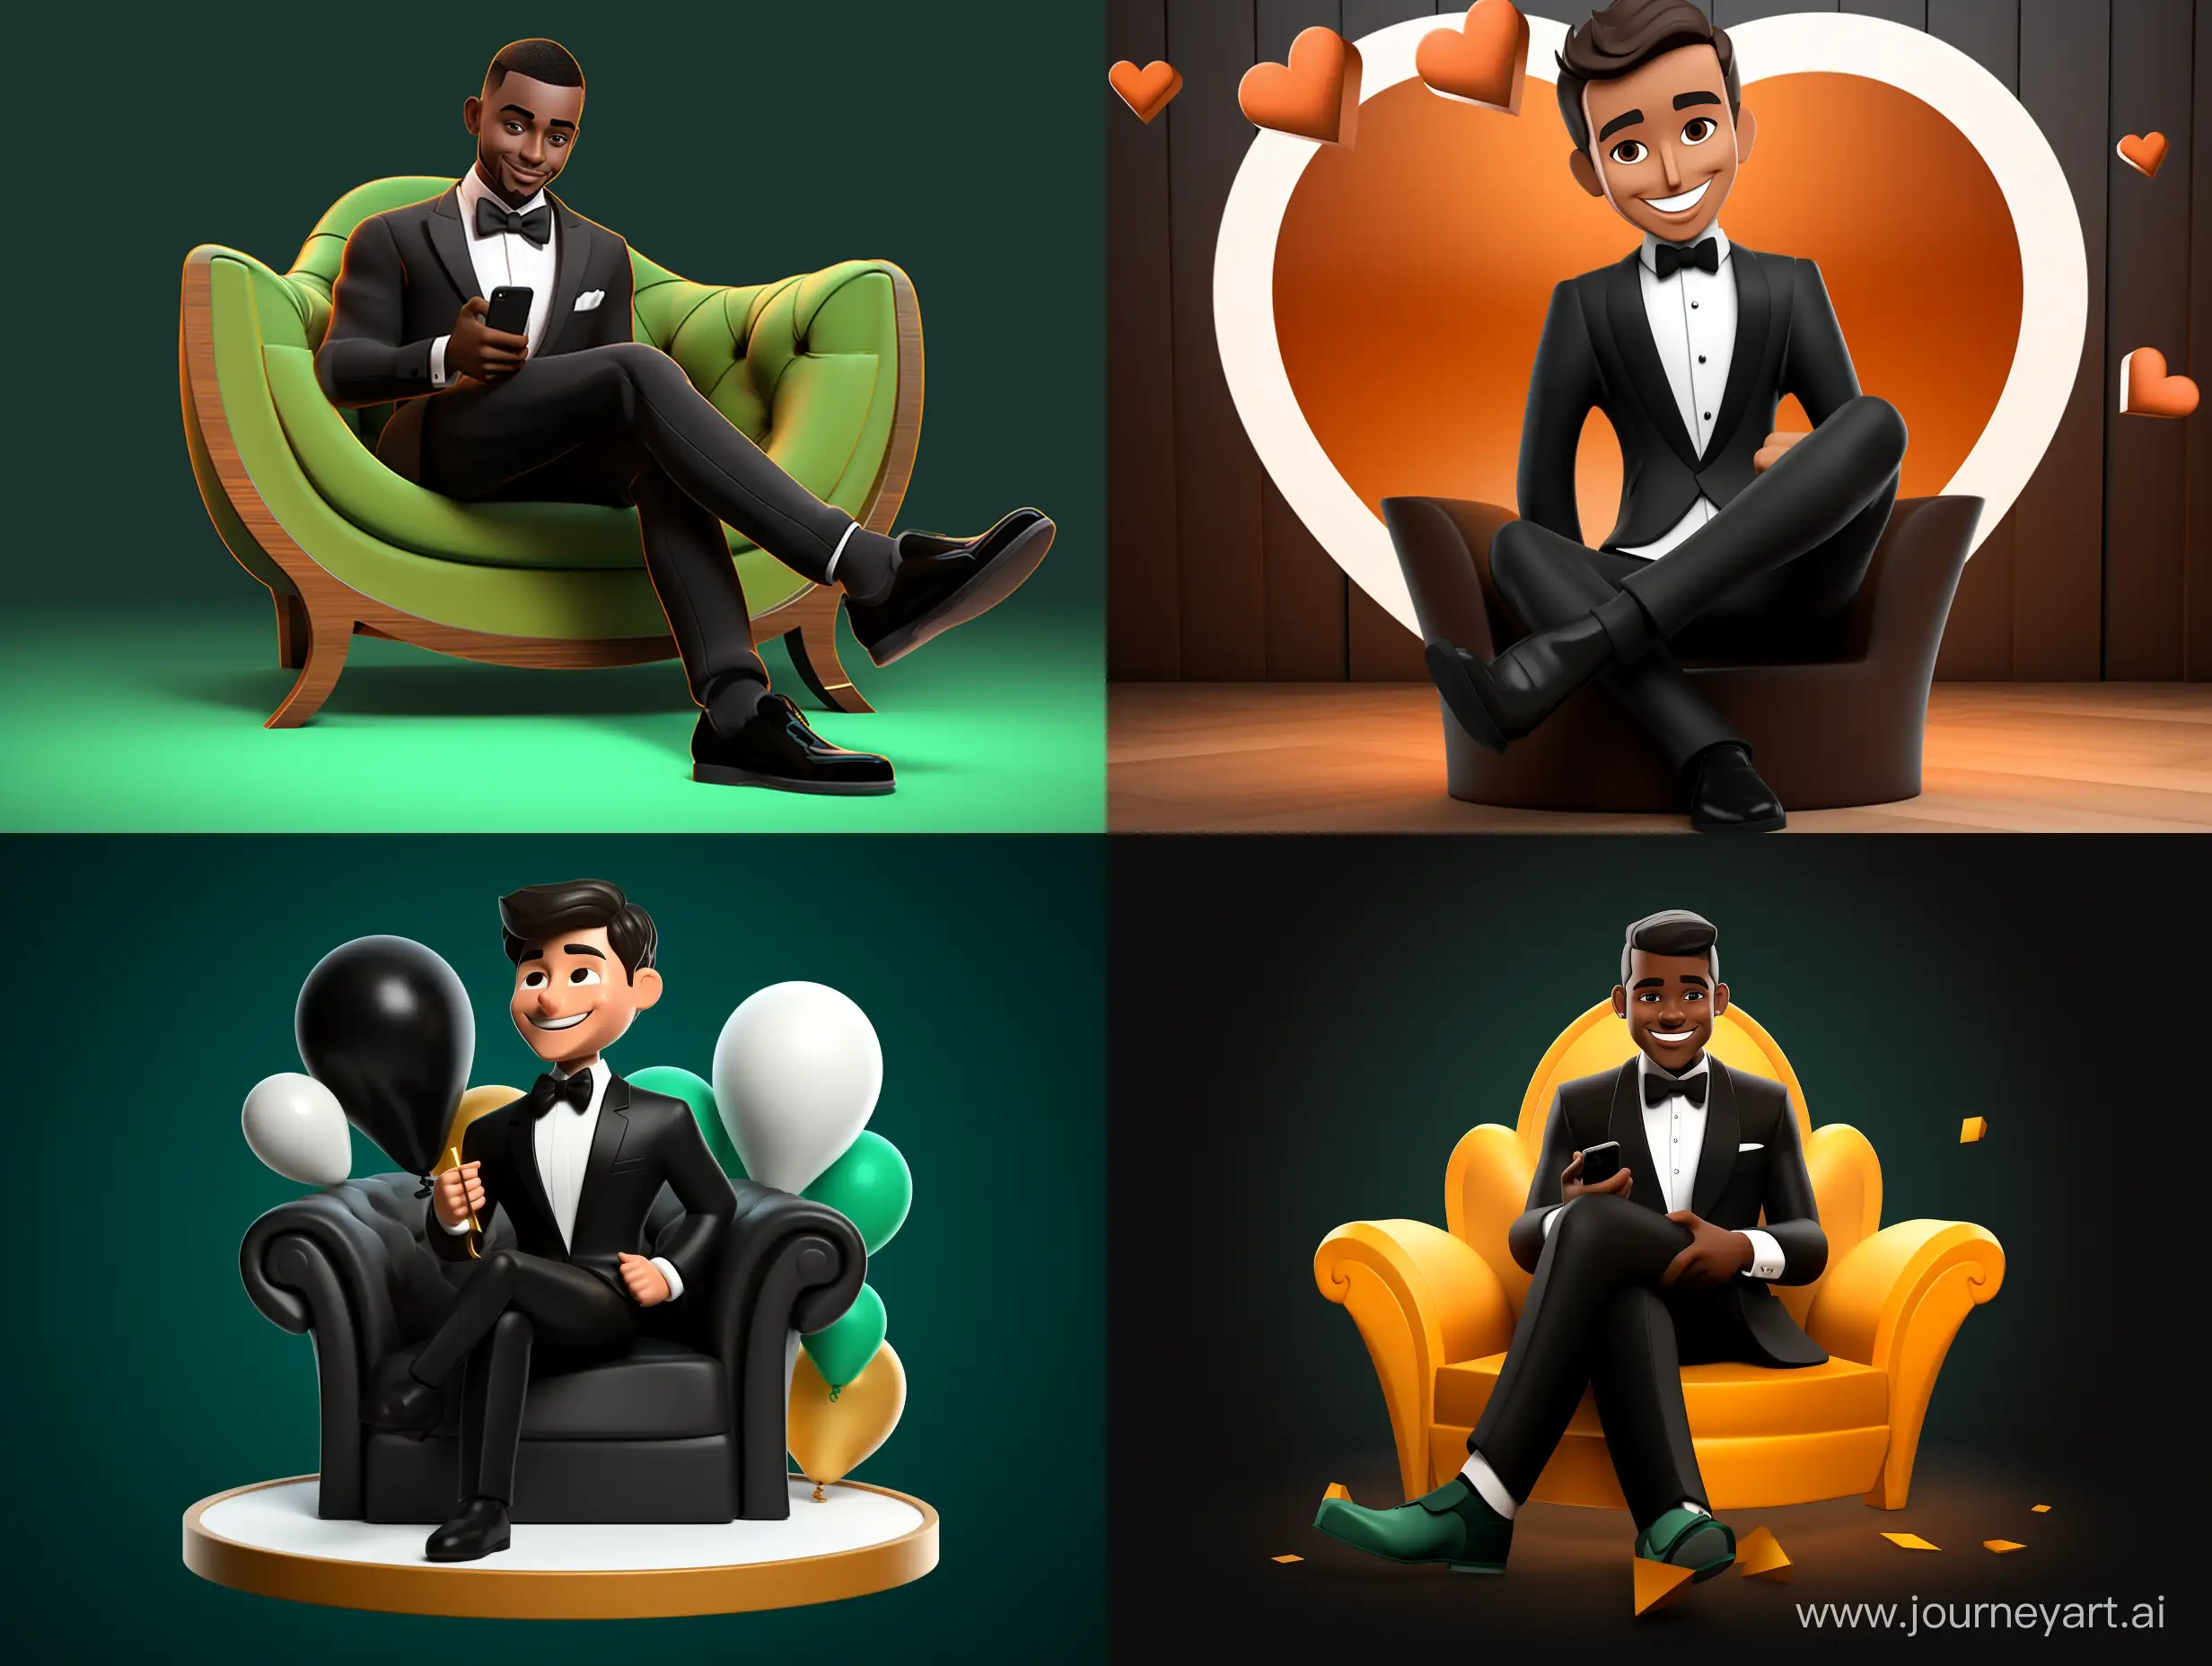 Create a 3D illustration of an animated characters sitting casually on top of a social media logo "WHATSAPP ". The character must be chocolate in complexion and wear formal clothing such as tuxedo, bow tie and shoe . The background of the image is a social media profile page with a user name "DHECENT " and a profile picture that match.